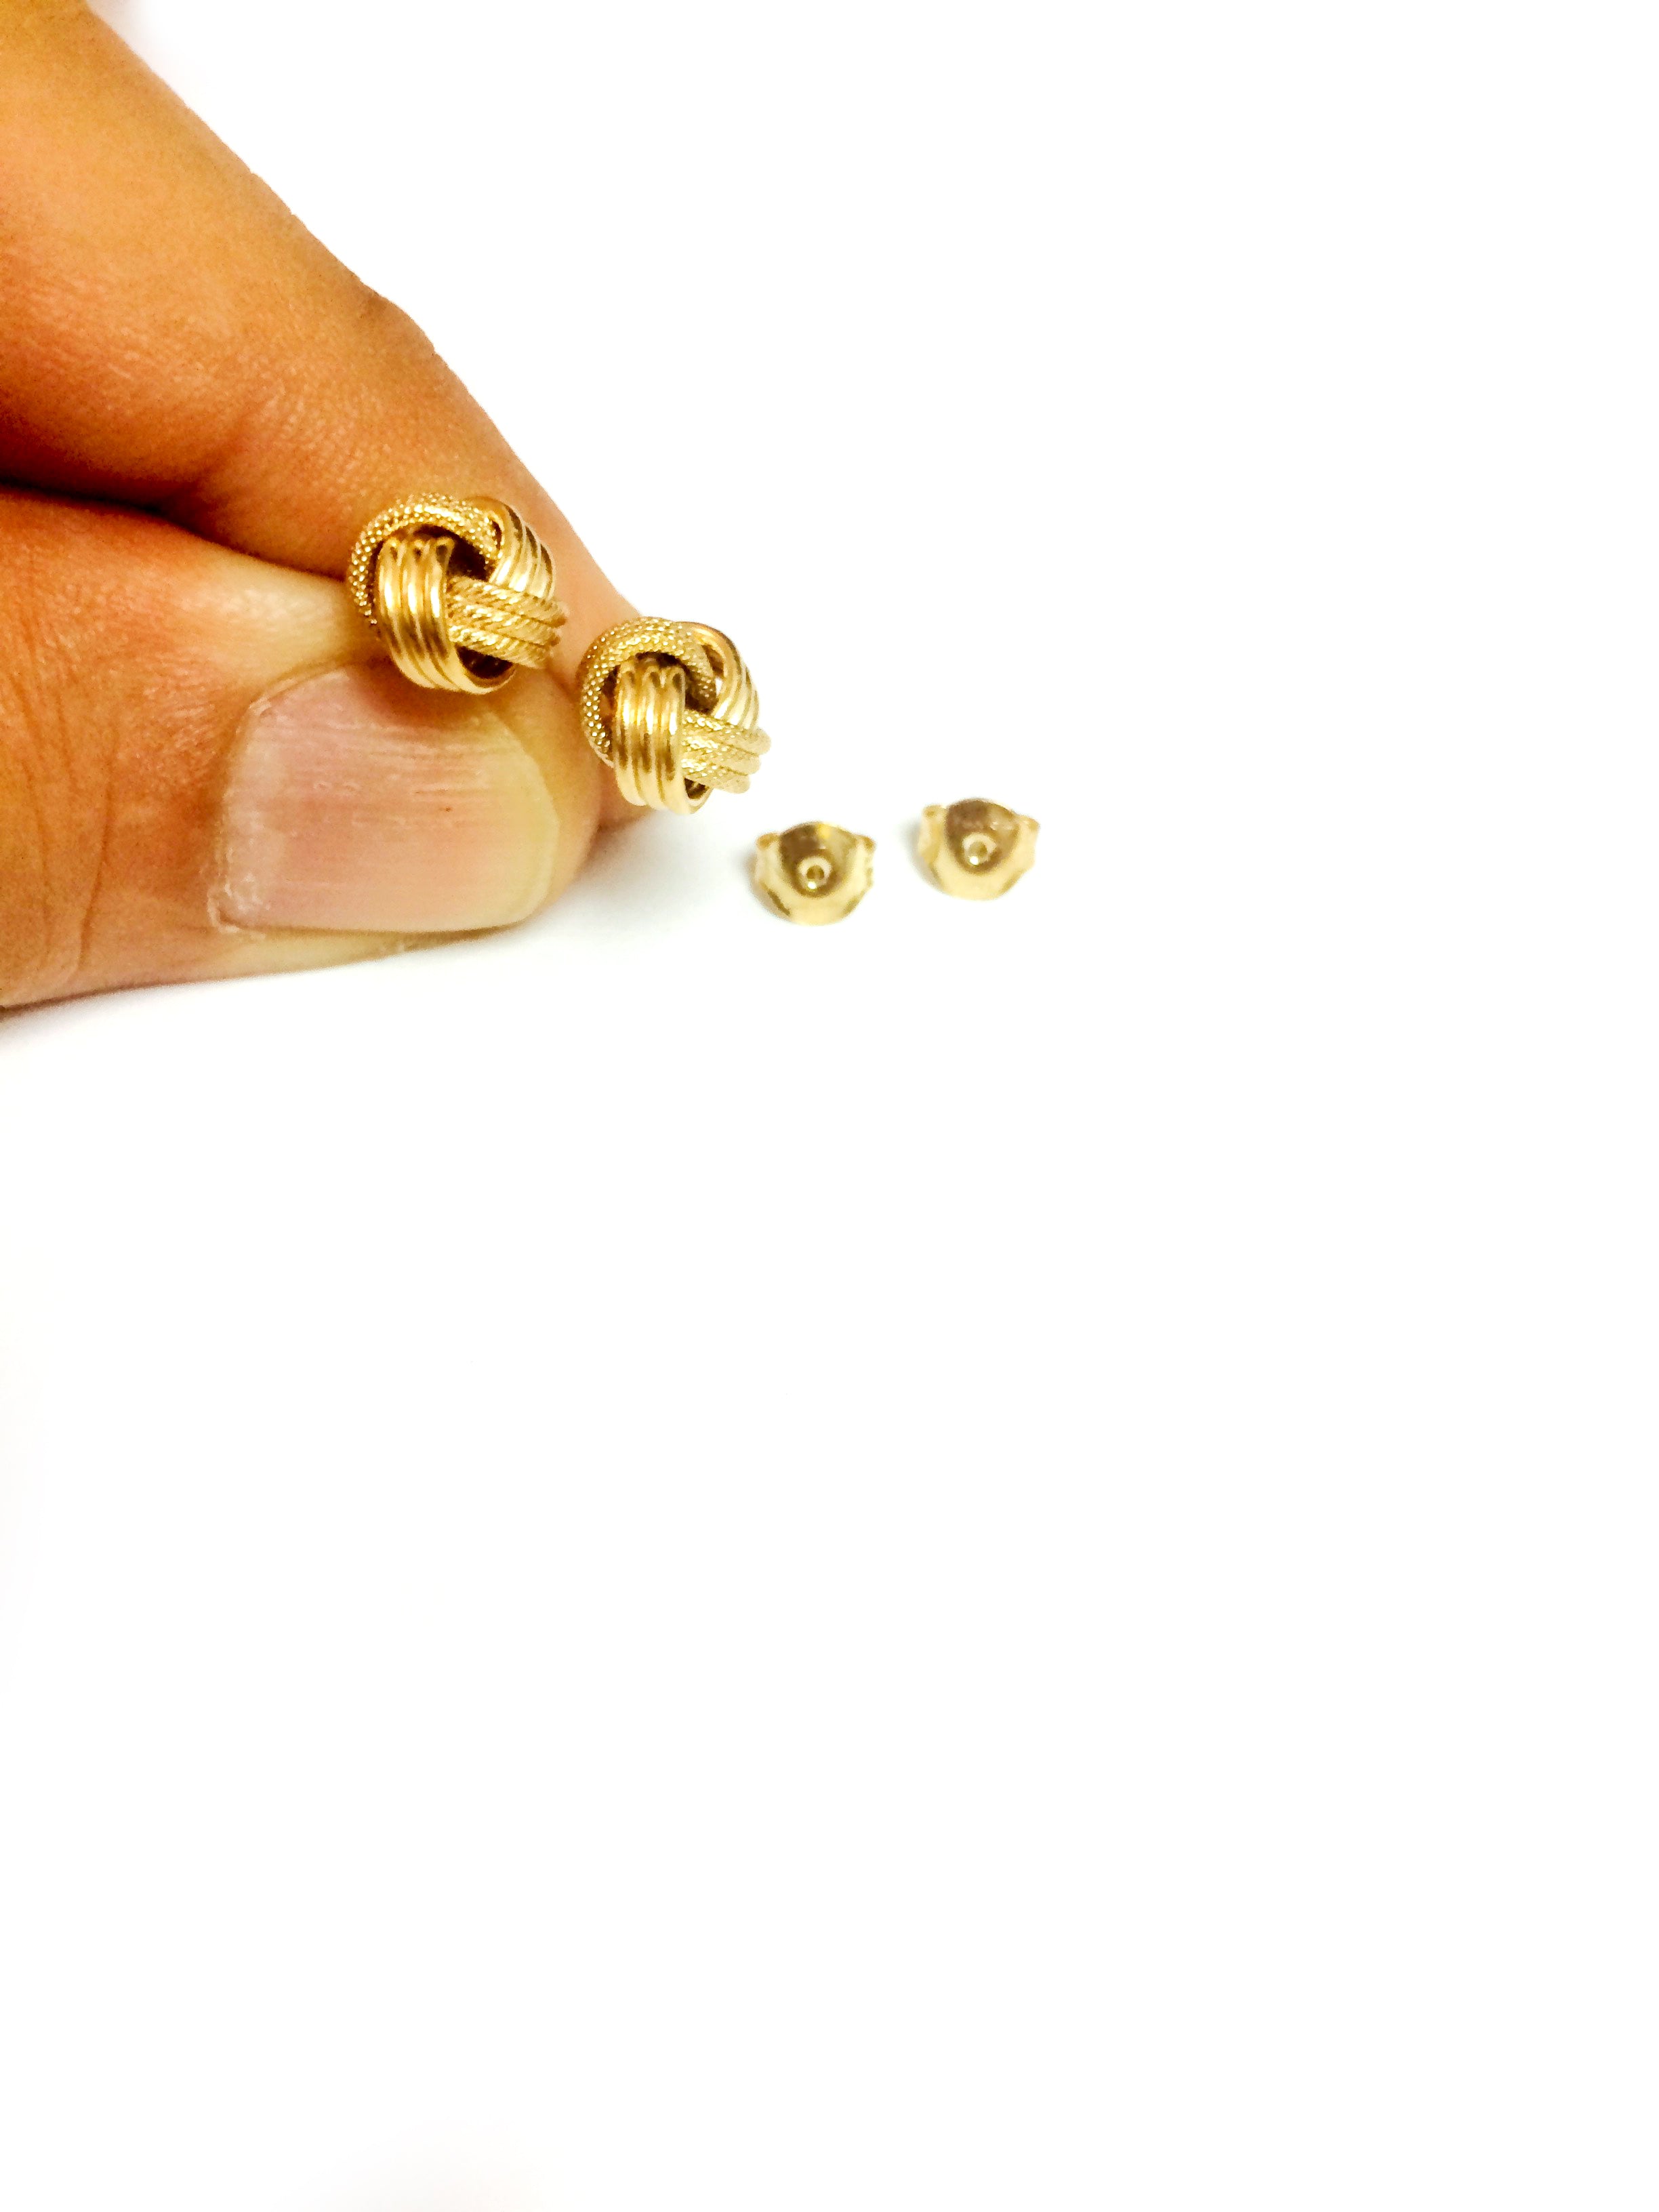 10k Yellow Gold Shiny And Textured Triple Love Knot Stud Earrings, 9mm fine designer jewelry for men and women